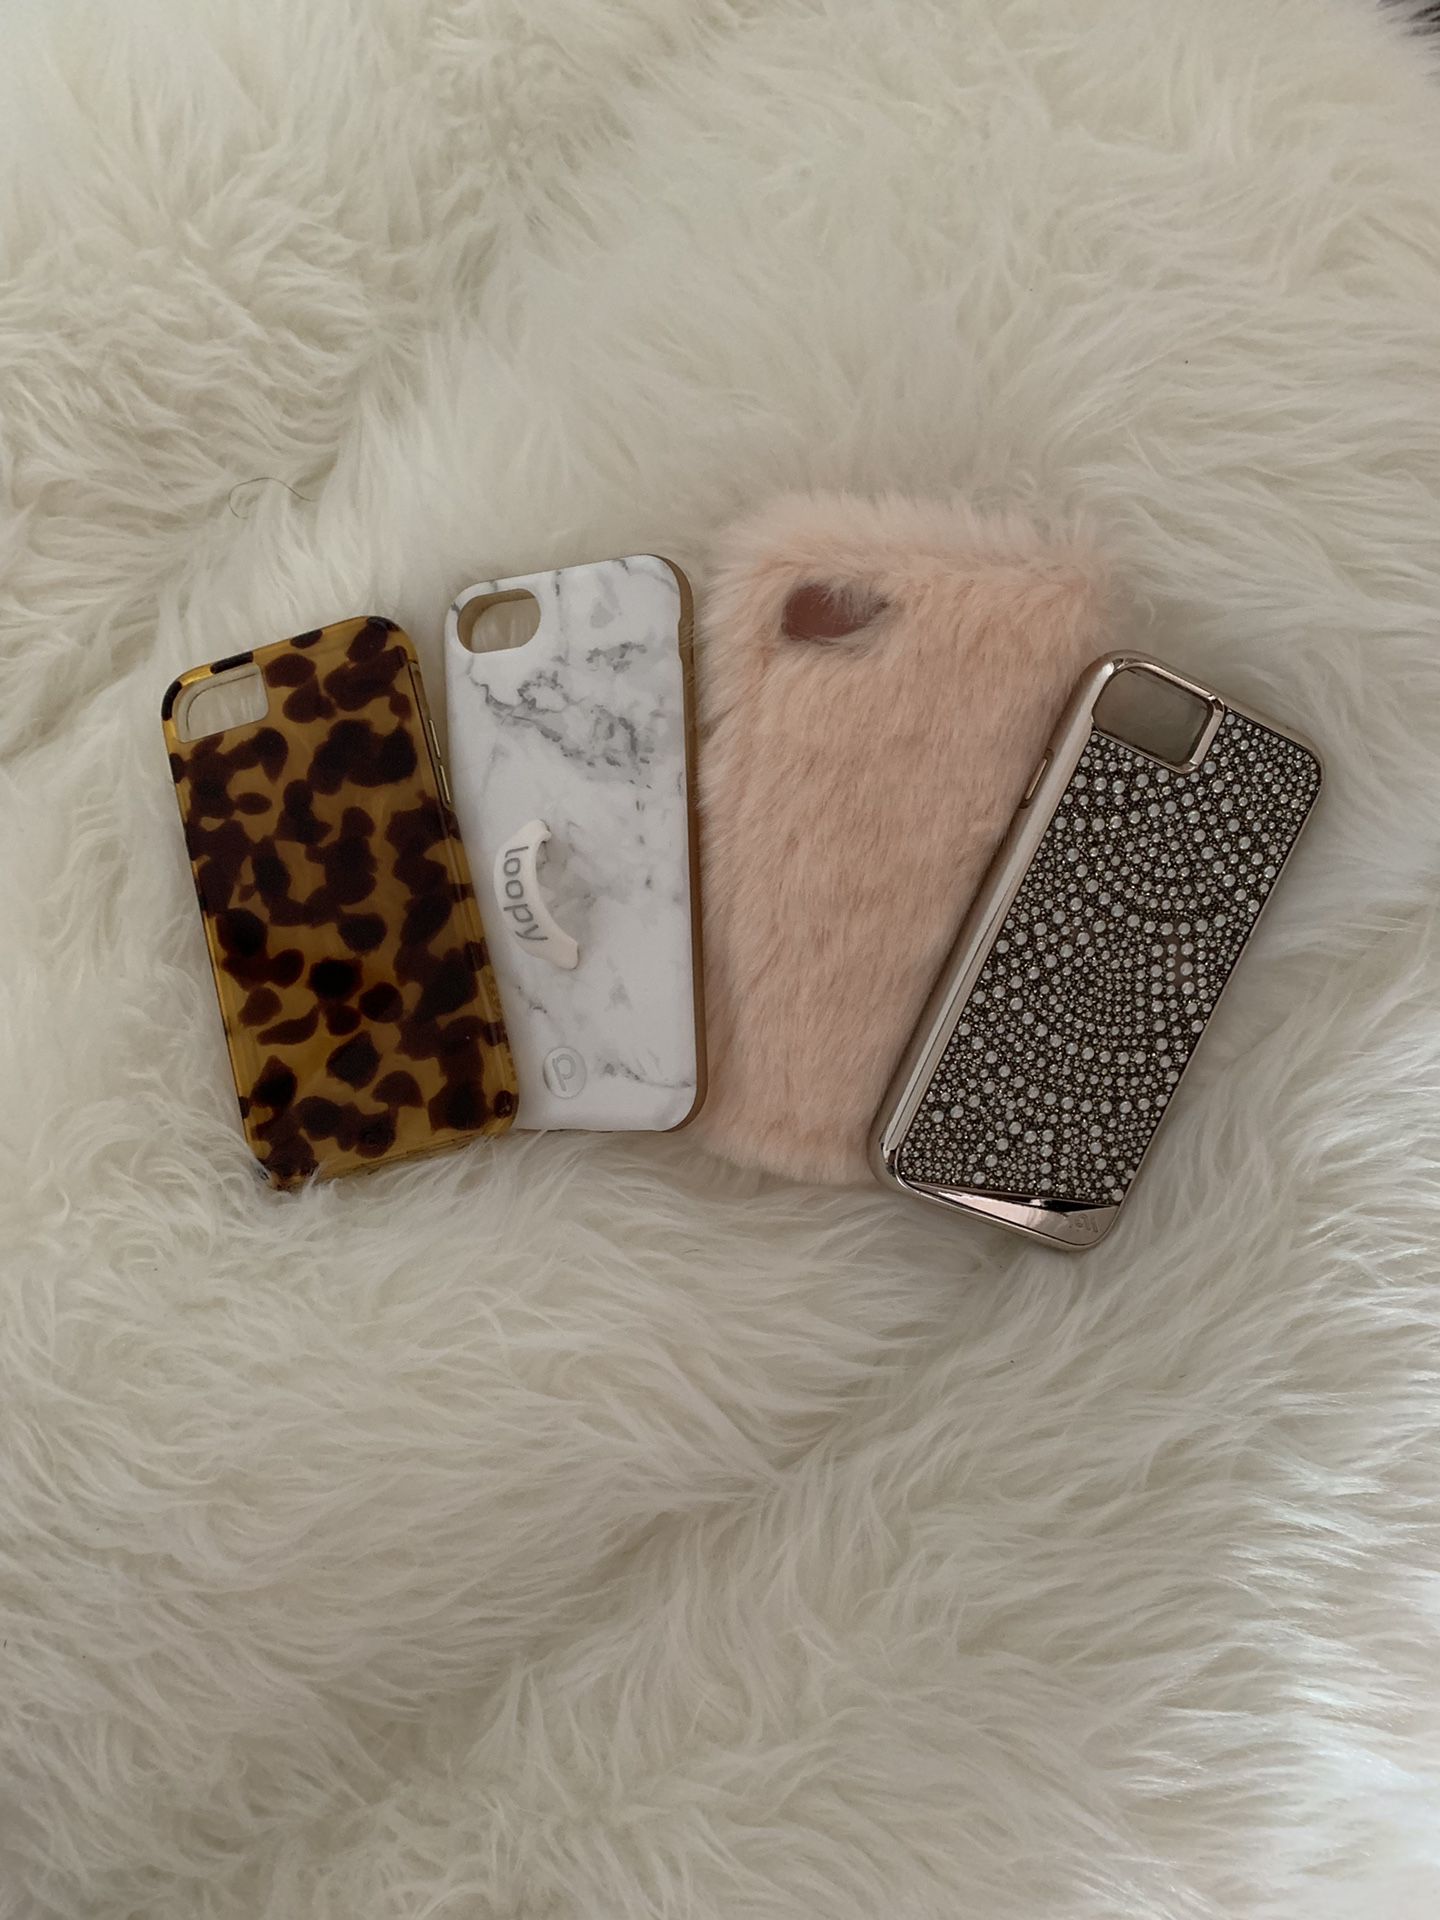 Lot of 4 iPhone 7 covers, Loopy (sold), Casemate